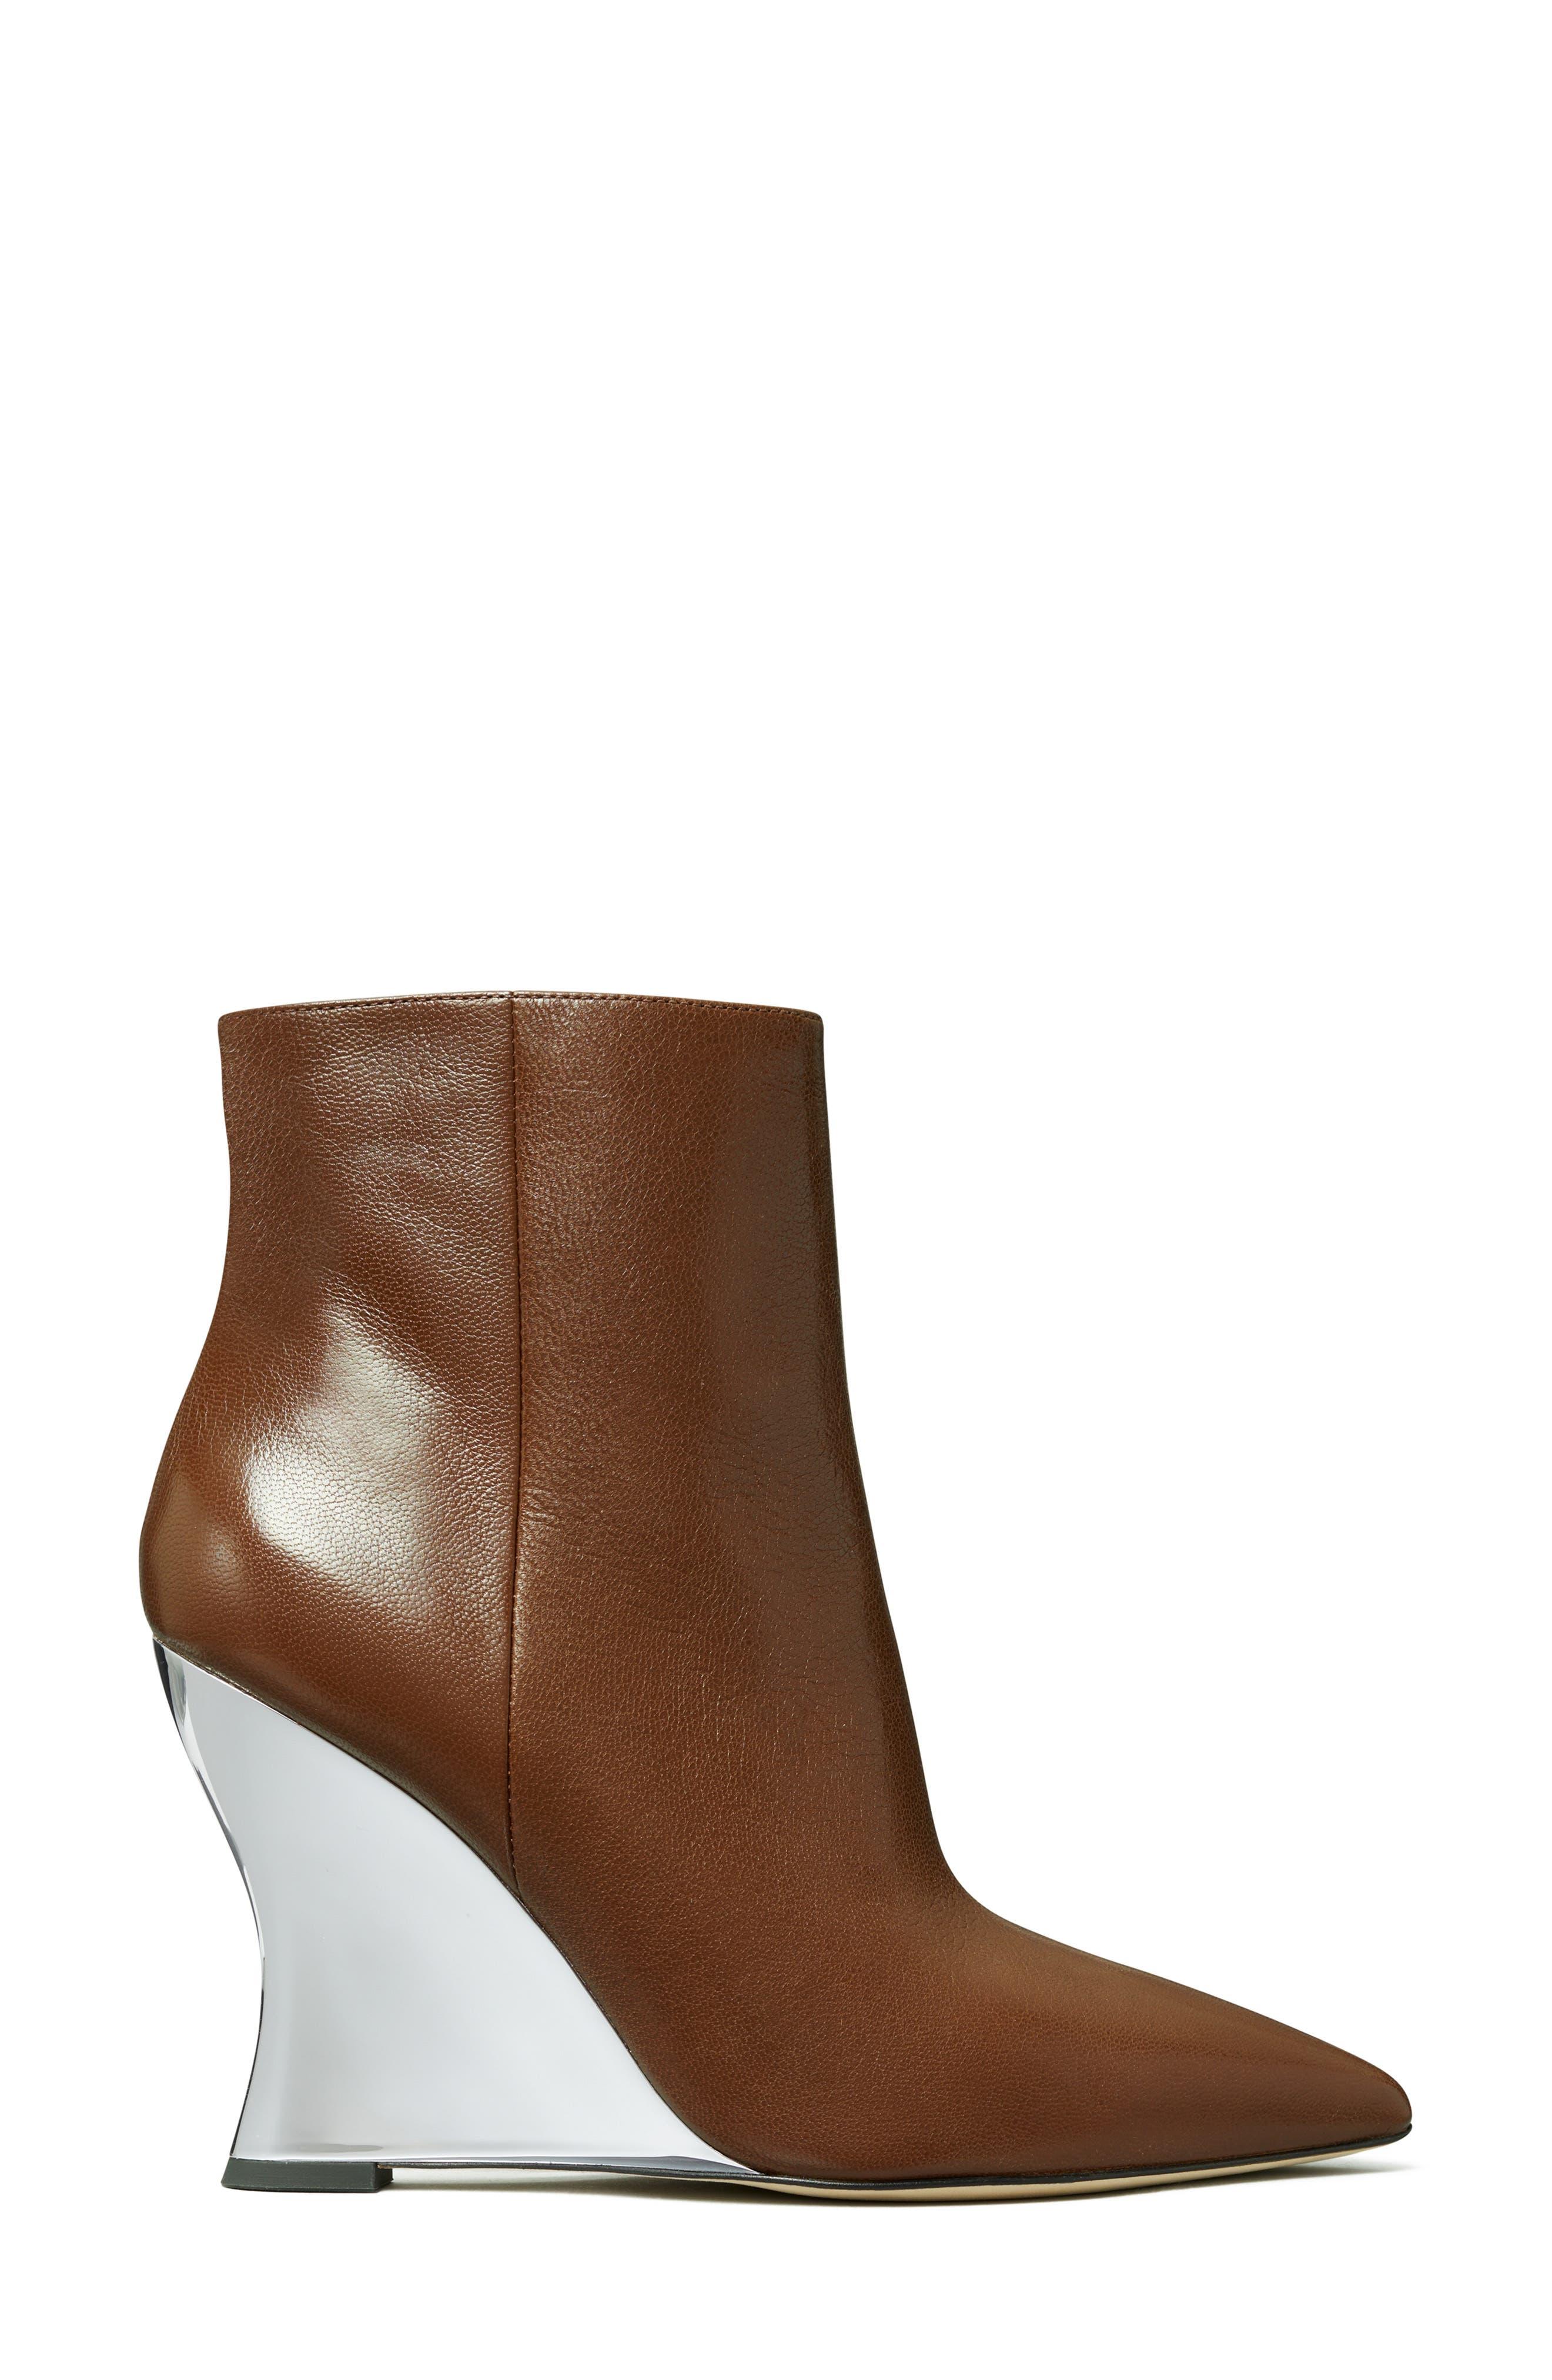 Tory Burch Pointed Toe Sculpted Wedge Ankle Bootie in Brown | Lyst